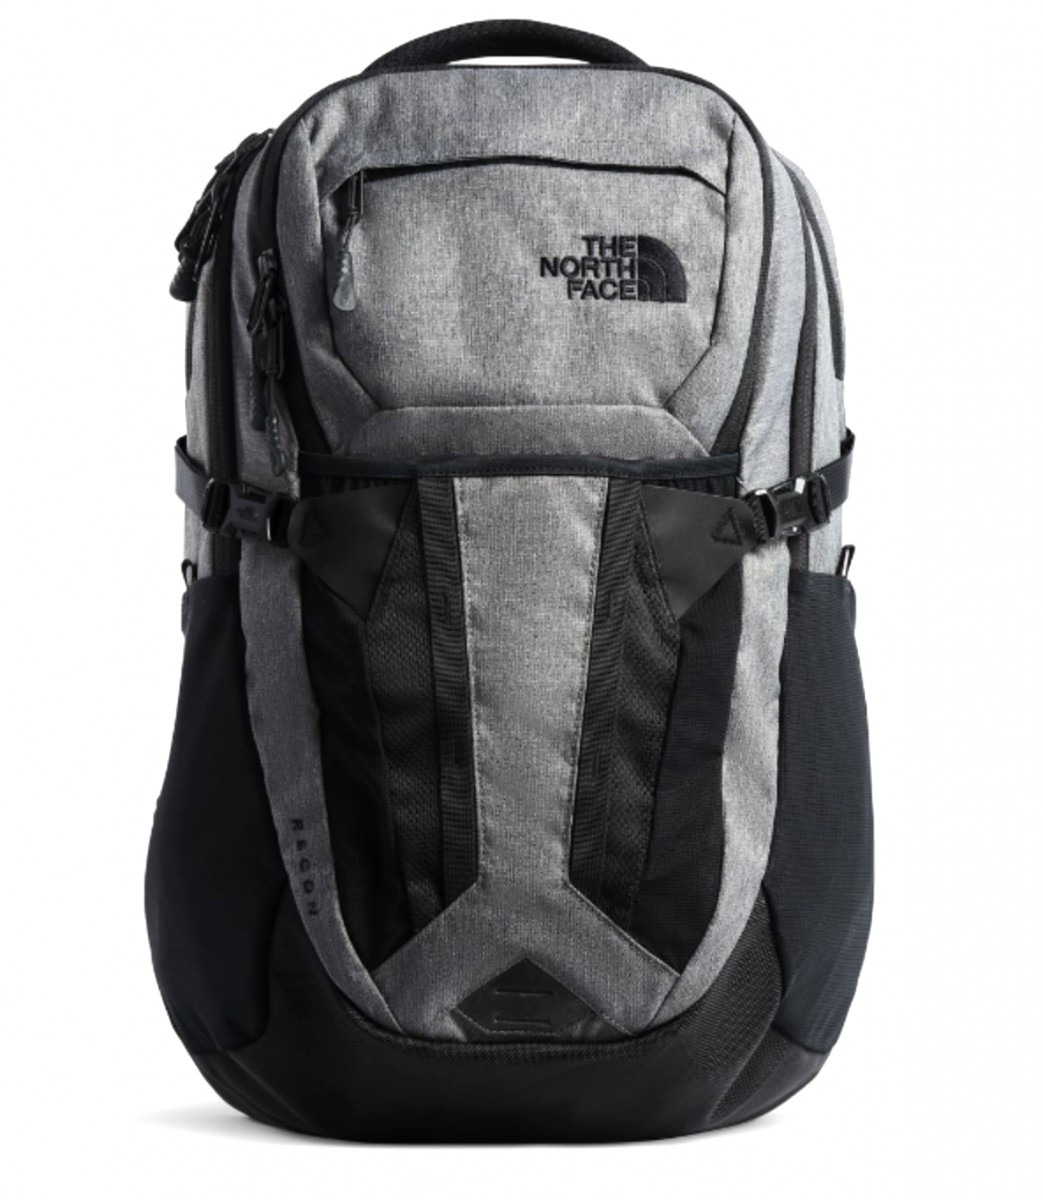 THE NORTH FACE The North Face Mochila Outdoor